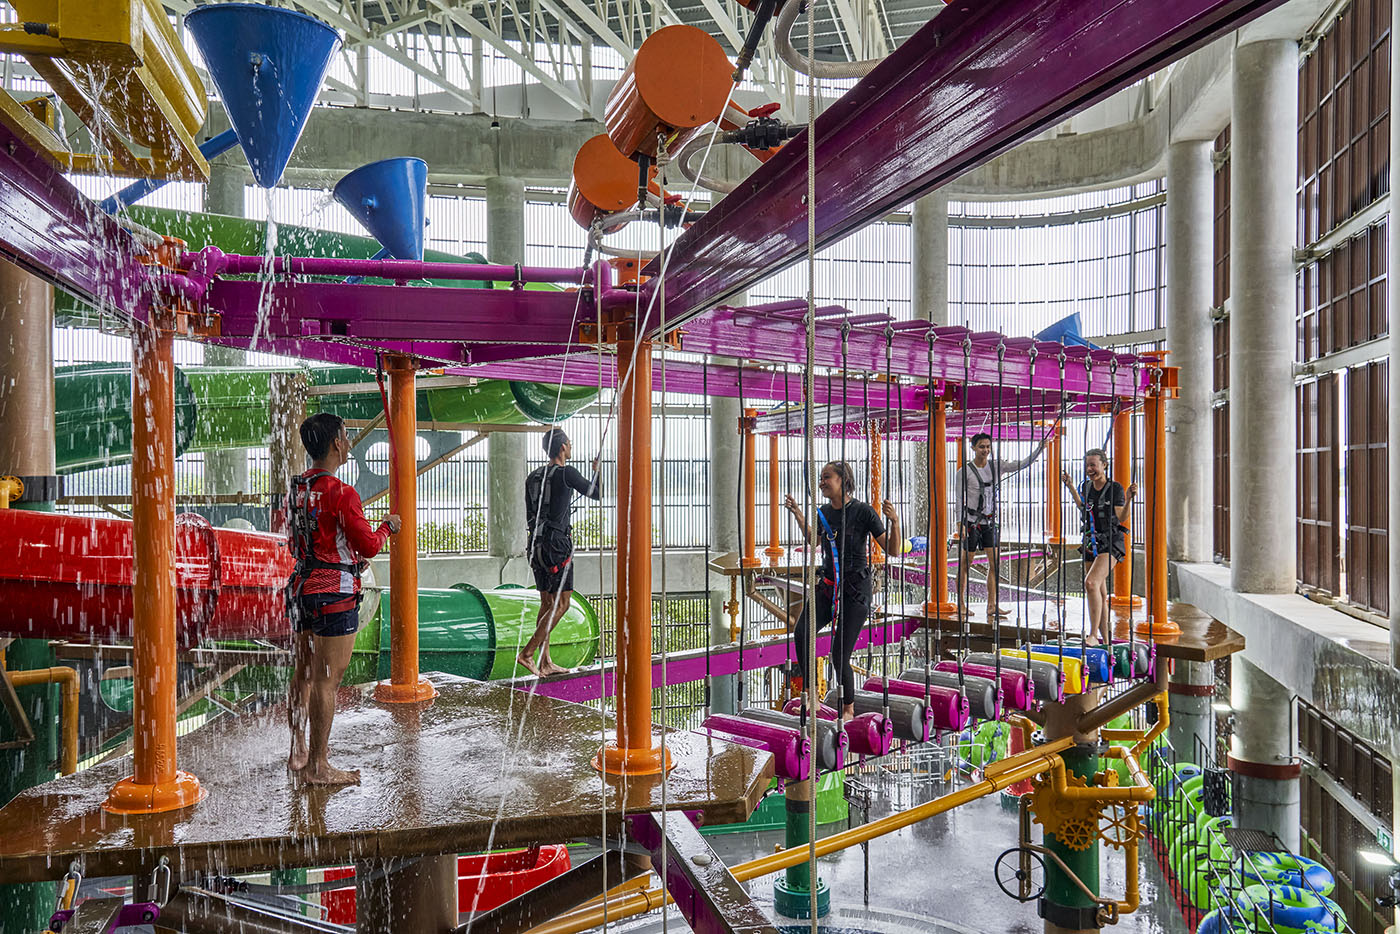 CHALLENGE YOURSELF AND HELP YOUR BUDDIES ACROSS THE WET OBSTACLE COURSE